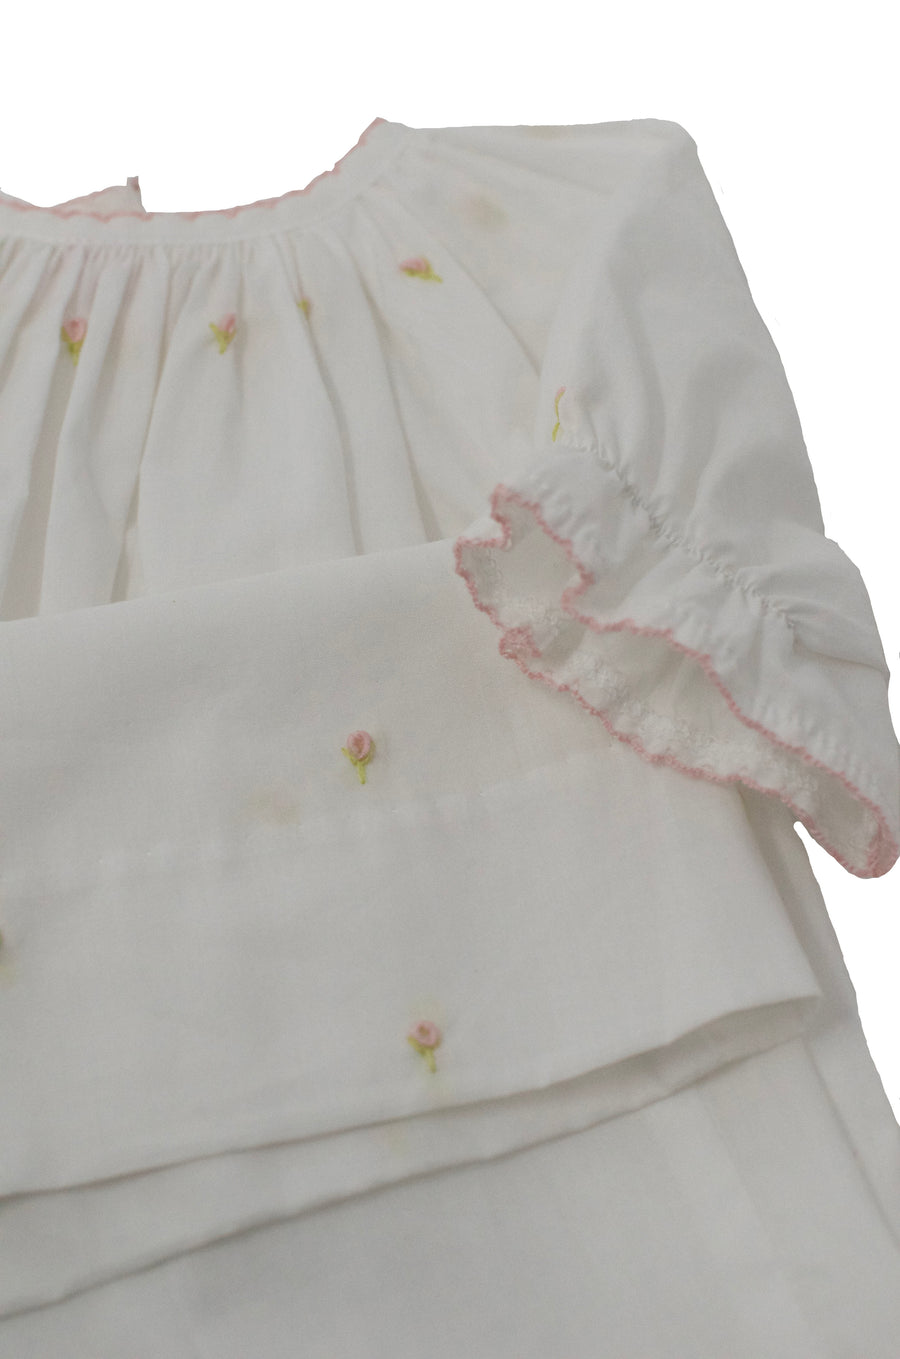 BABY AVA ROSE COTTON DAYGOWN - Lenora